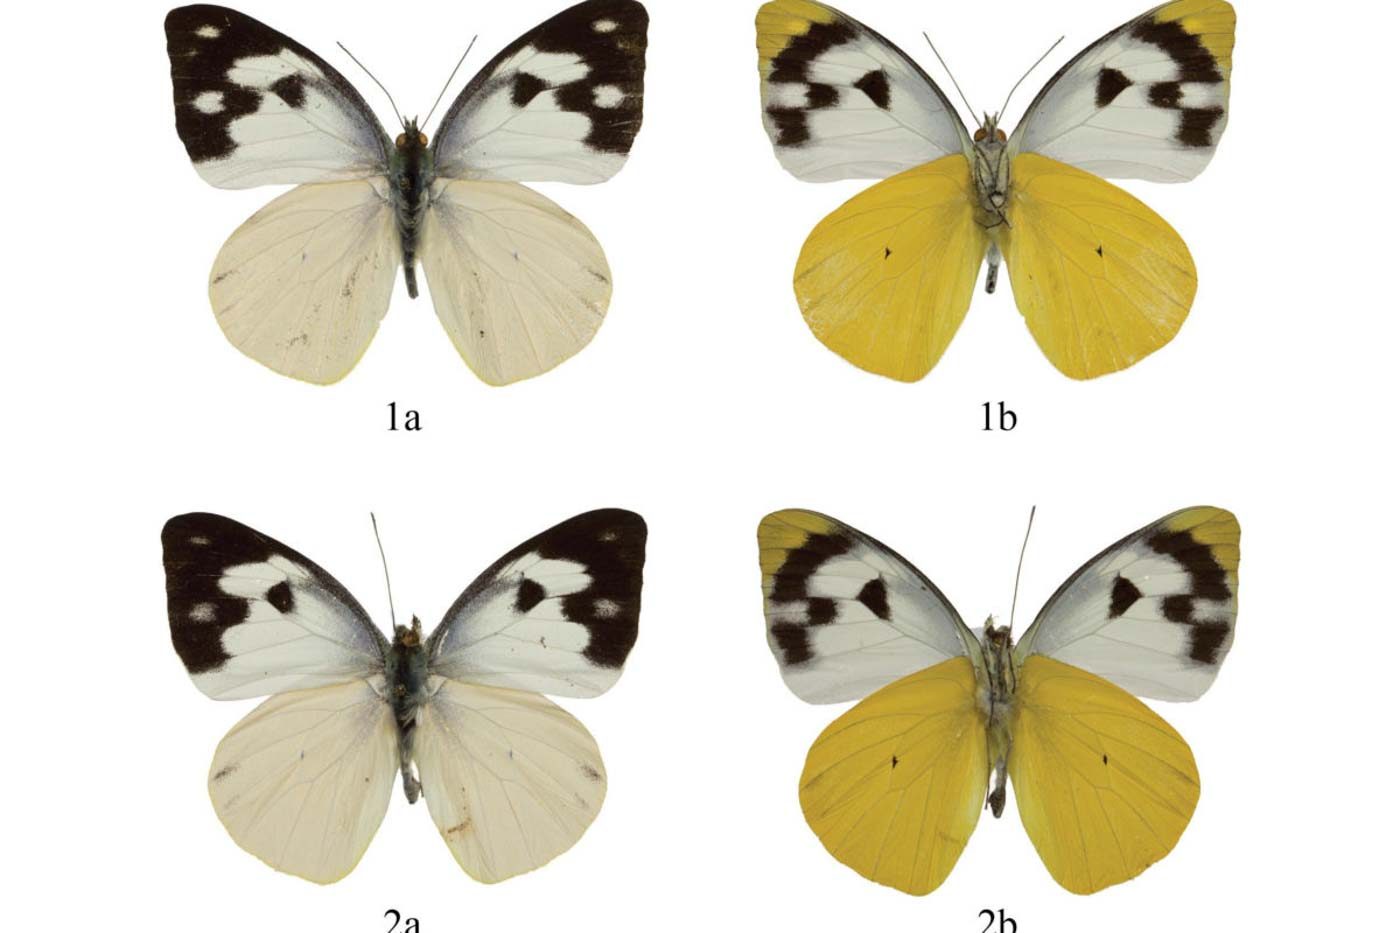 A. P. NUYDAI. Specimens of the new butterfly subspecies, A. p. nuydai. Images courtesy of Jade Badon 